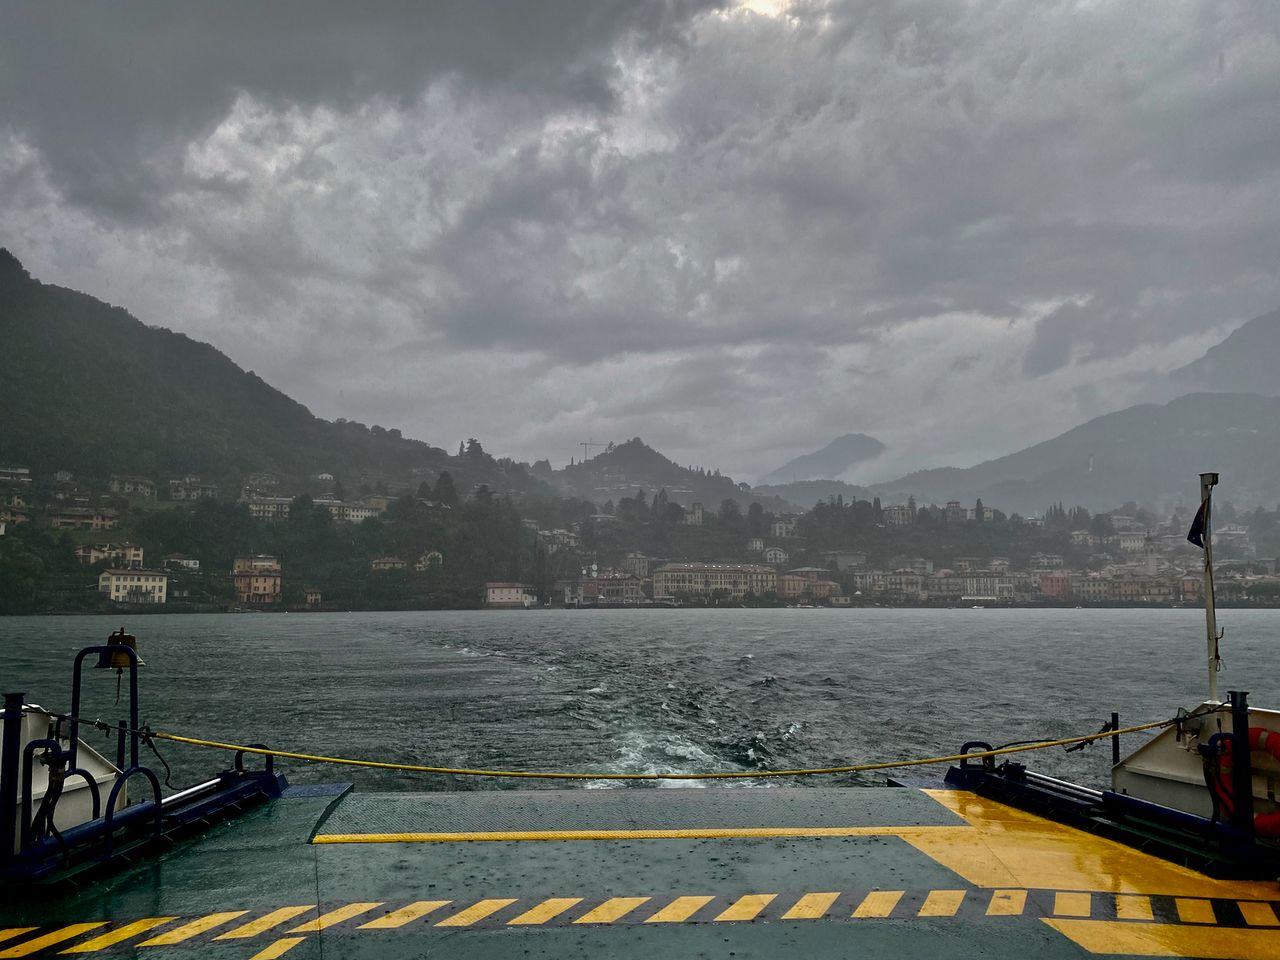 A cloudy, overcast view of Menaggio from the back of a ferry.